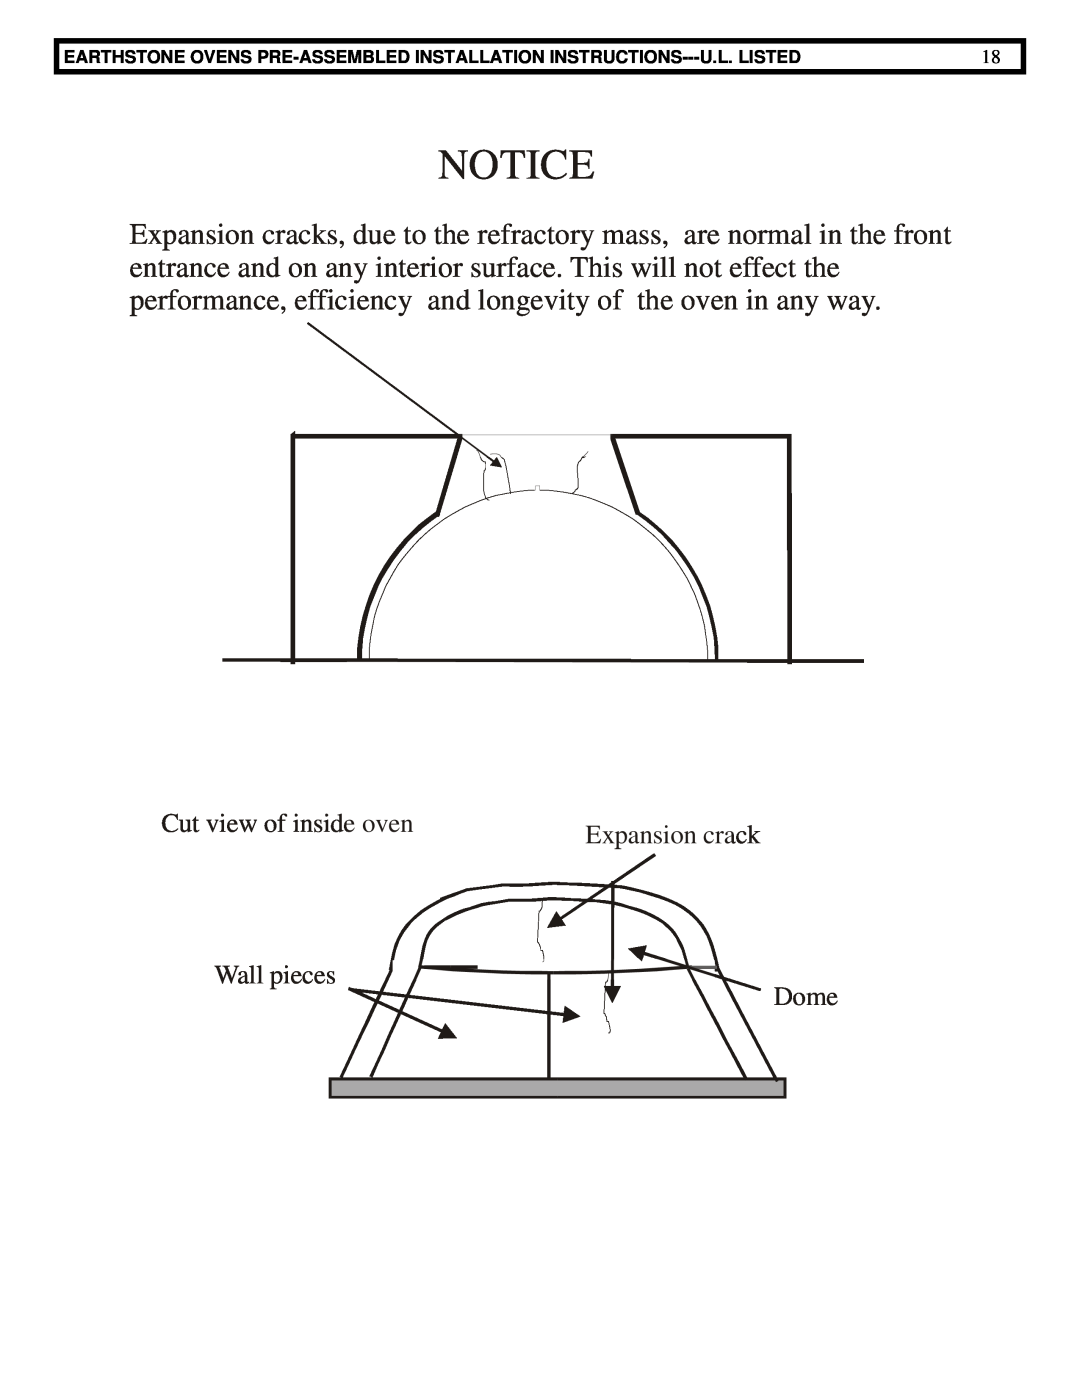 EarthStone woofire oven installation instructions Cut view of inside oven, Expansion crack, Wall pieces Dome 